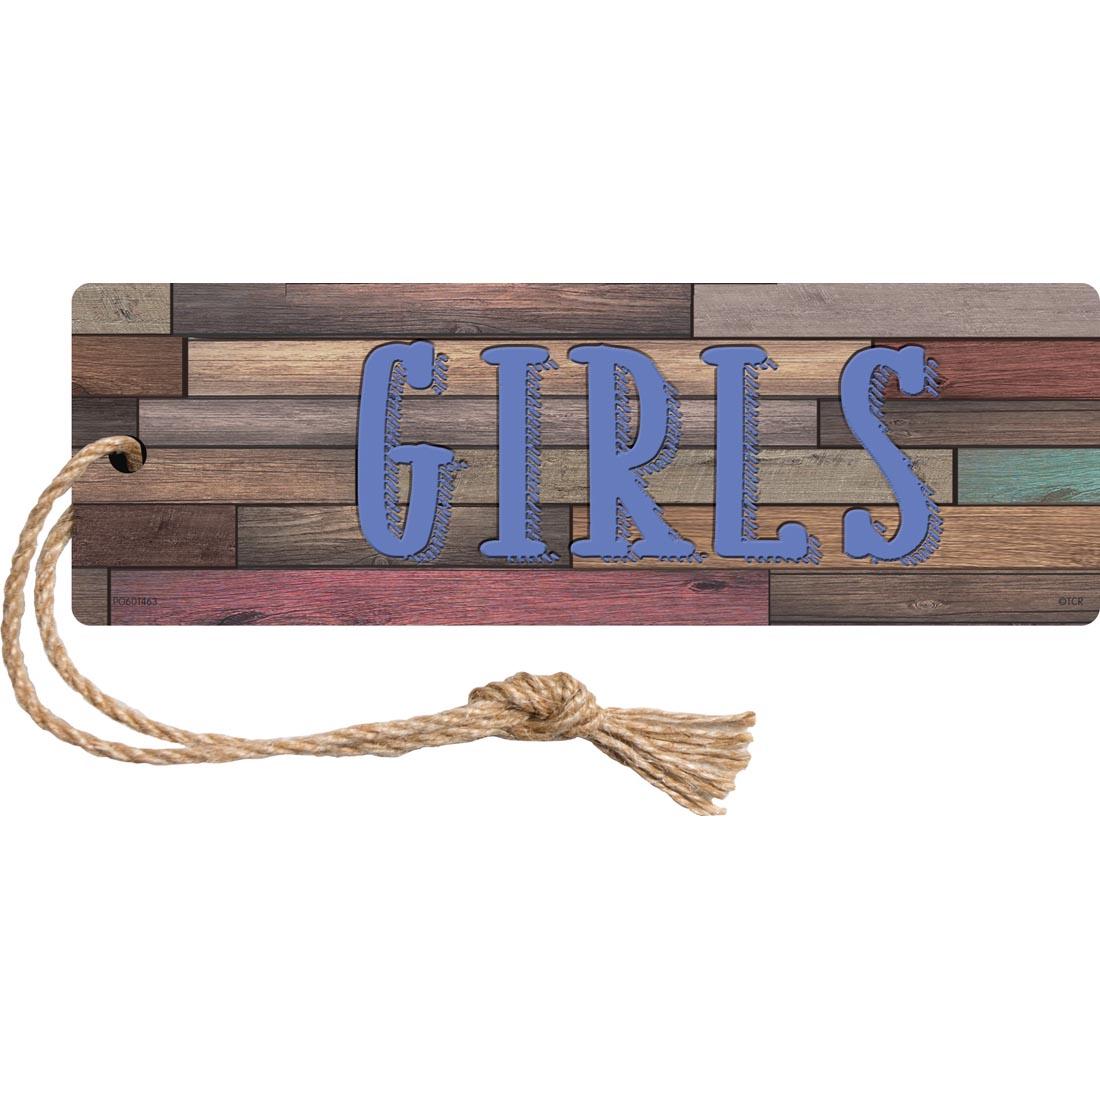 Magnetic Girls Pass from the Home Sweet Classroom collection by Teacher Created Resources